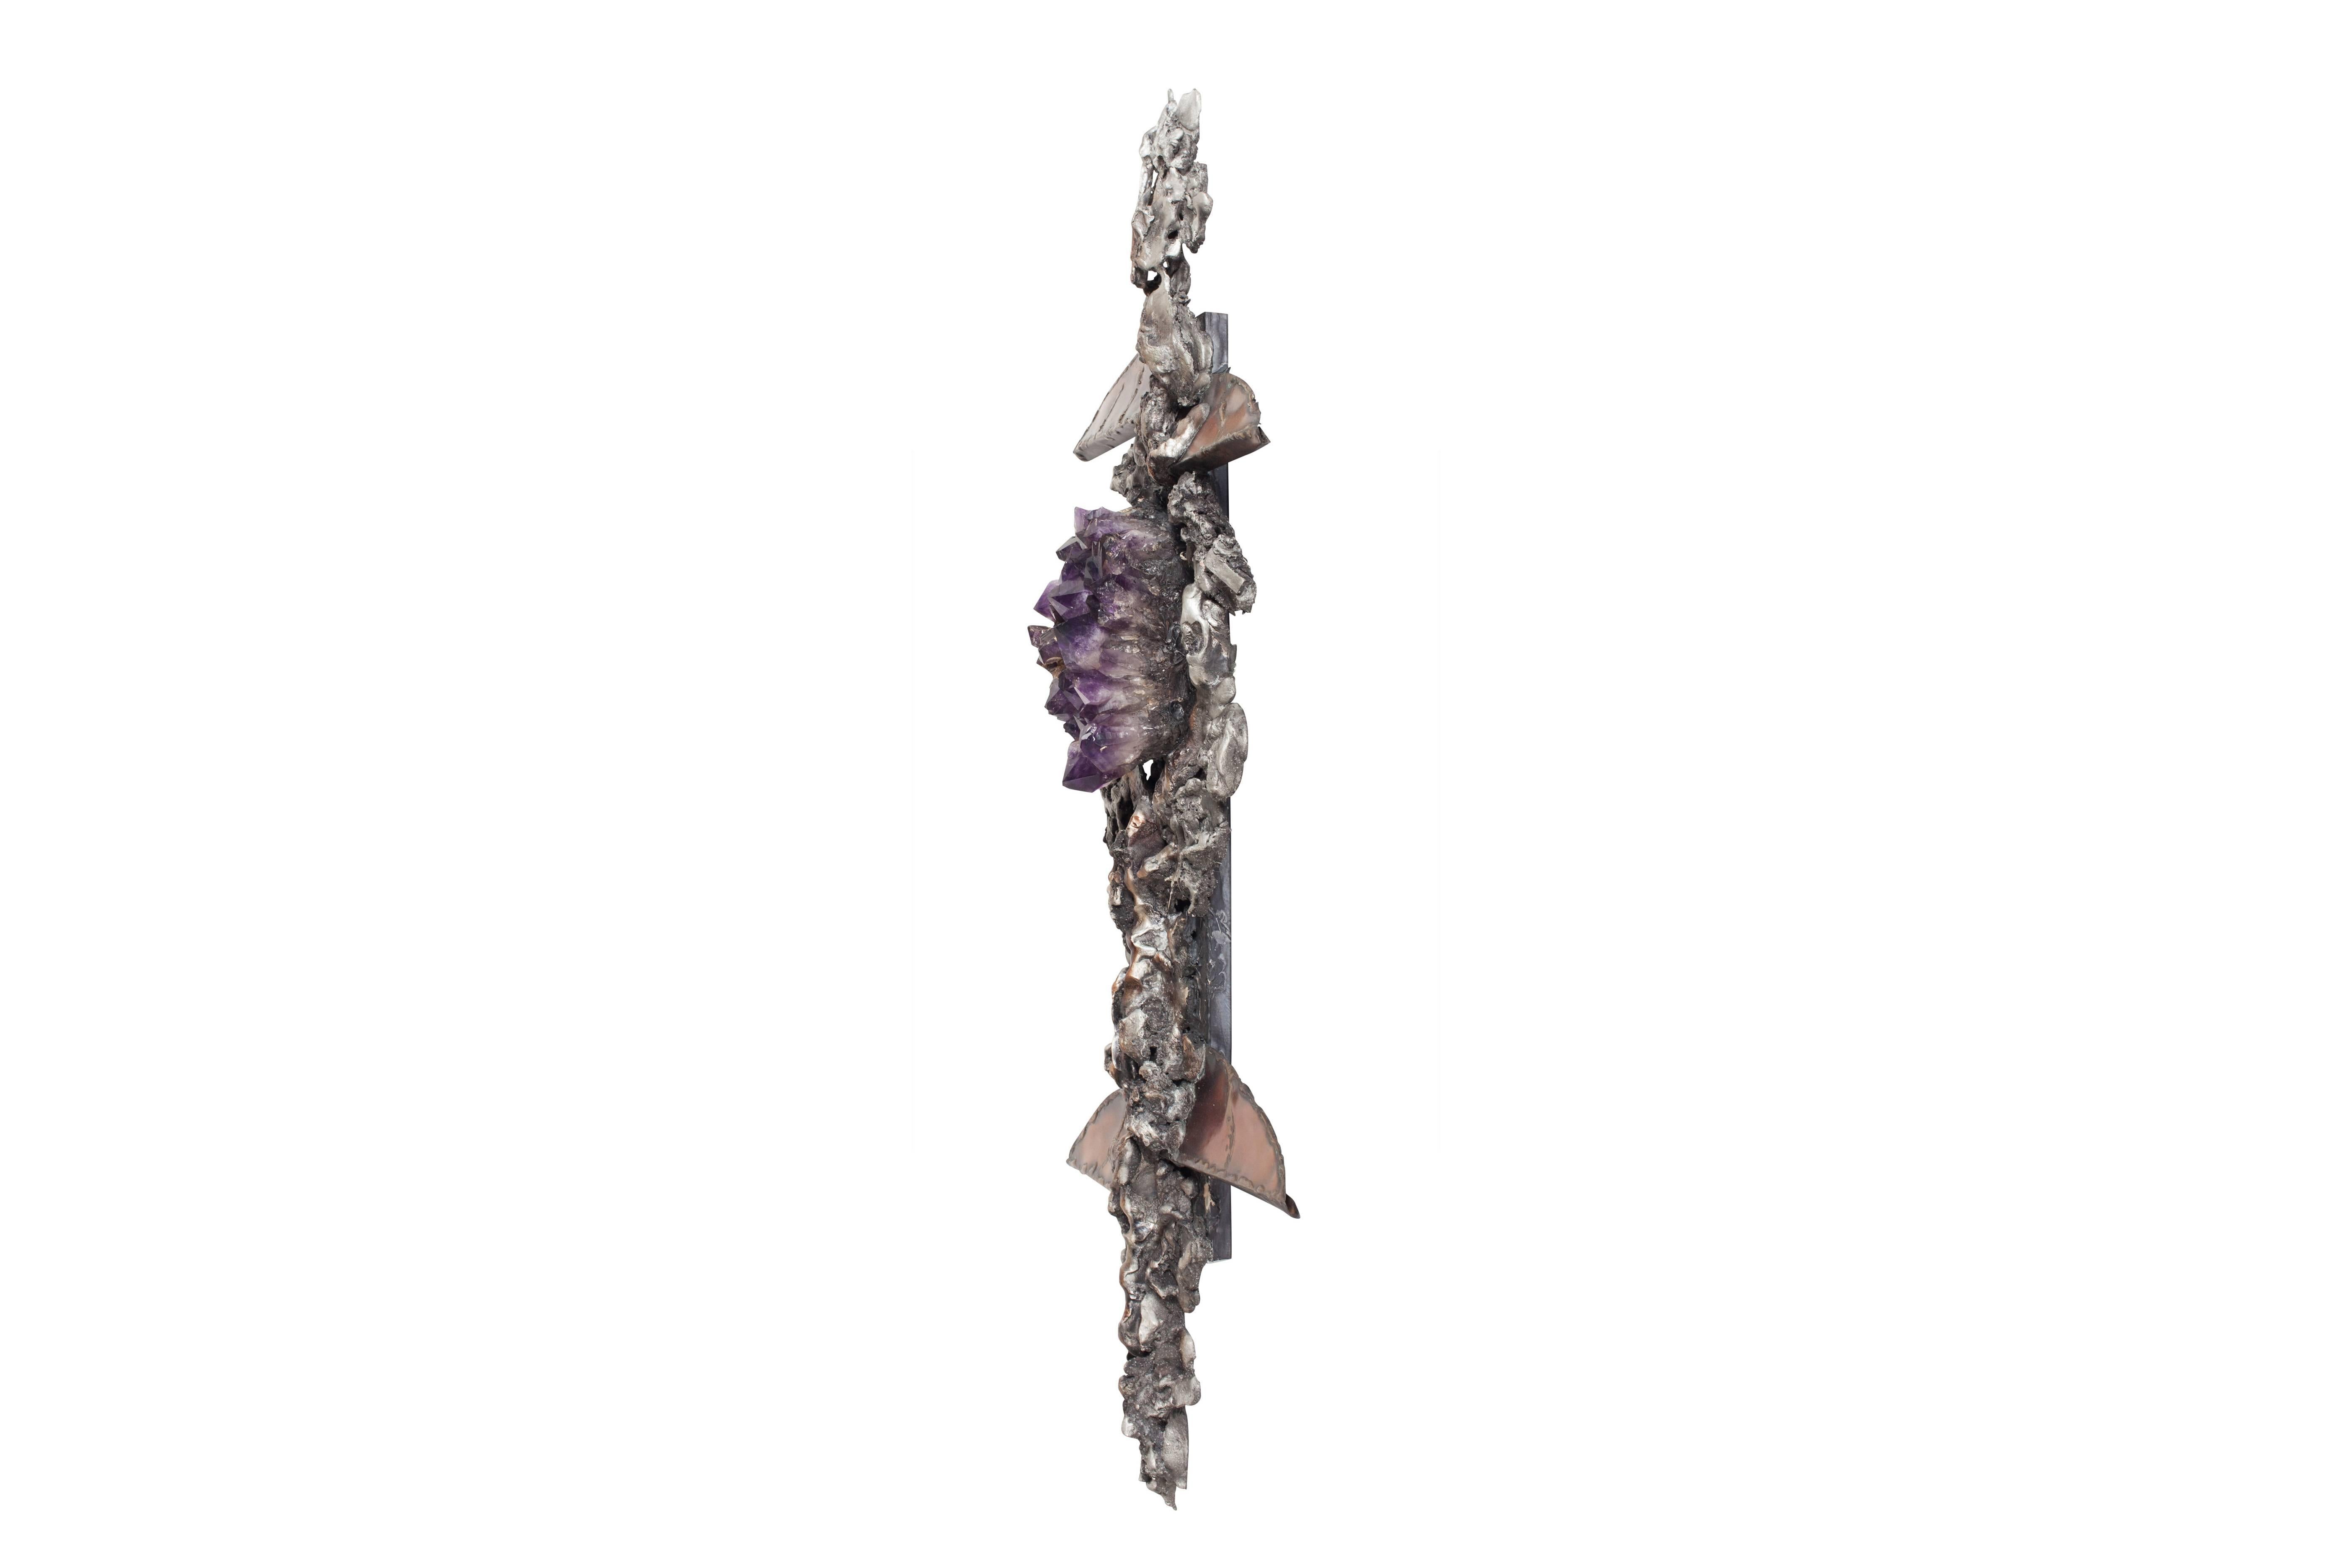 Hollywood Regency large and decorative wall-sculpture by Belgium designer Marc D’haenens, the 1970s.

The piece shows a variety of organic shapes in metal and copper, and a large piece of Amethyst as
centerpiece.